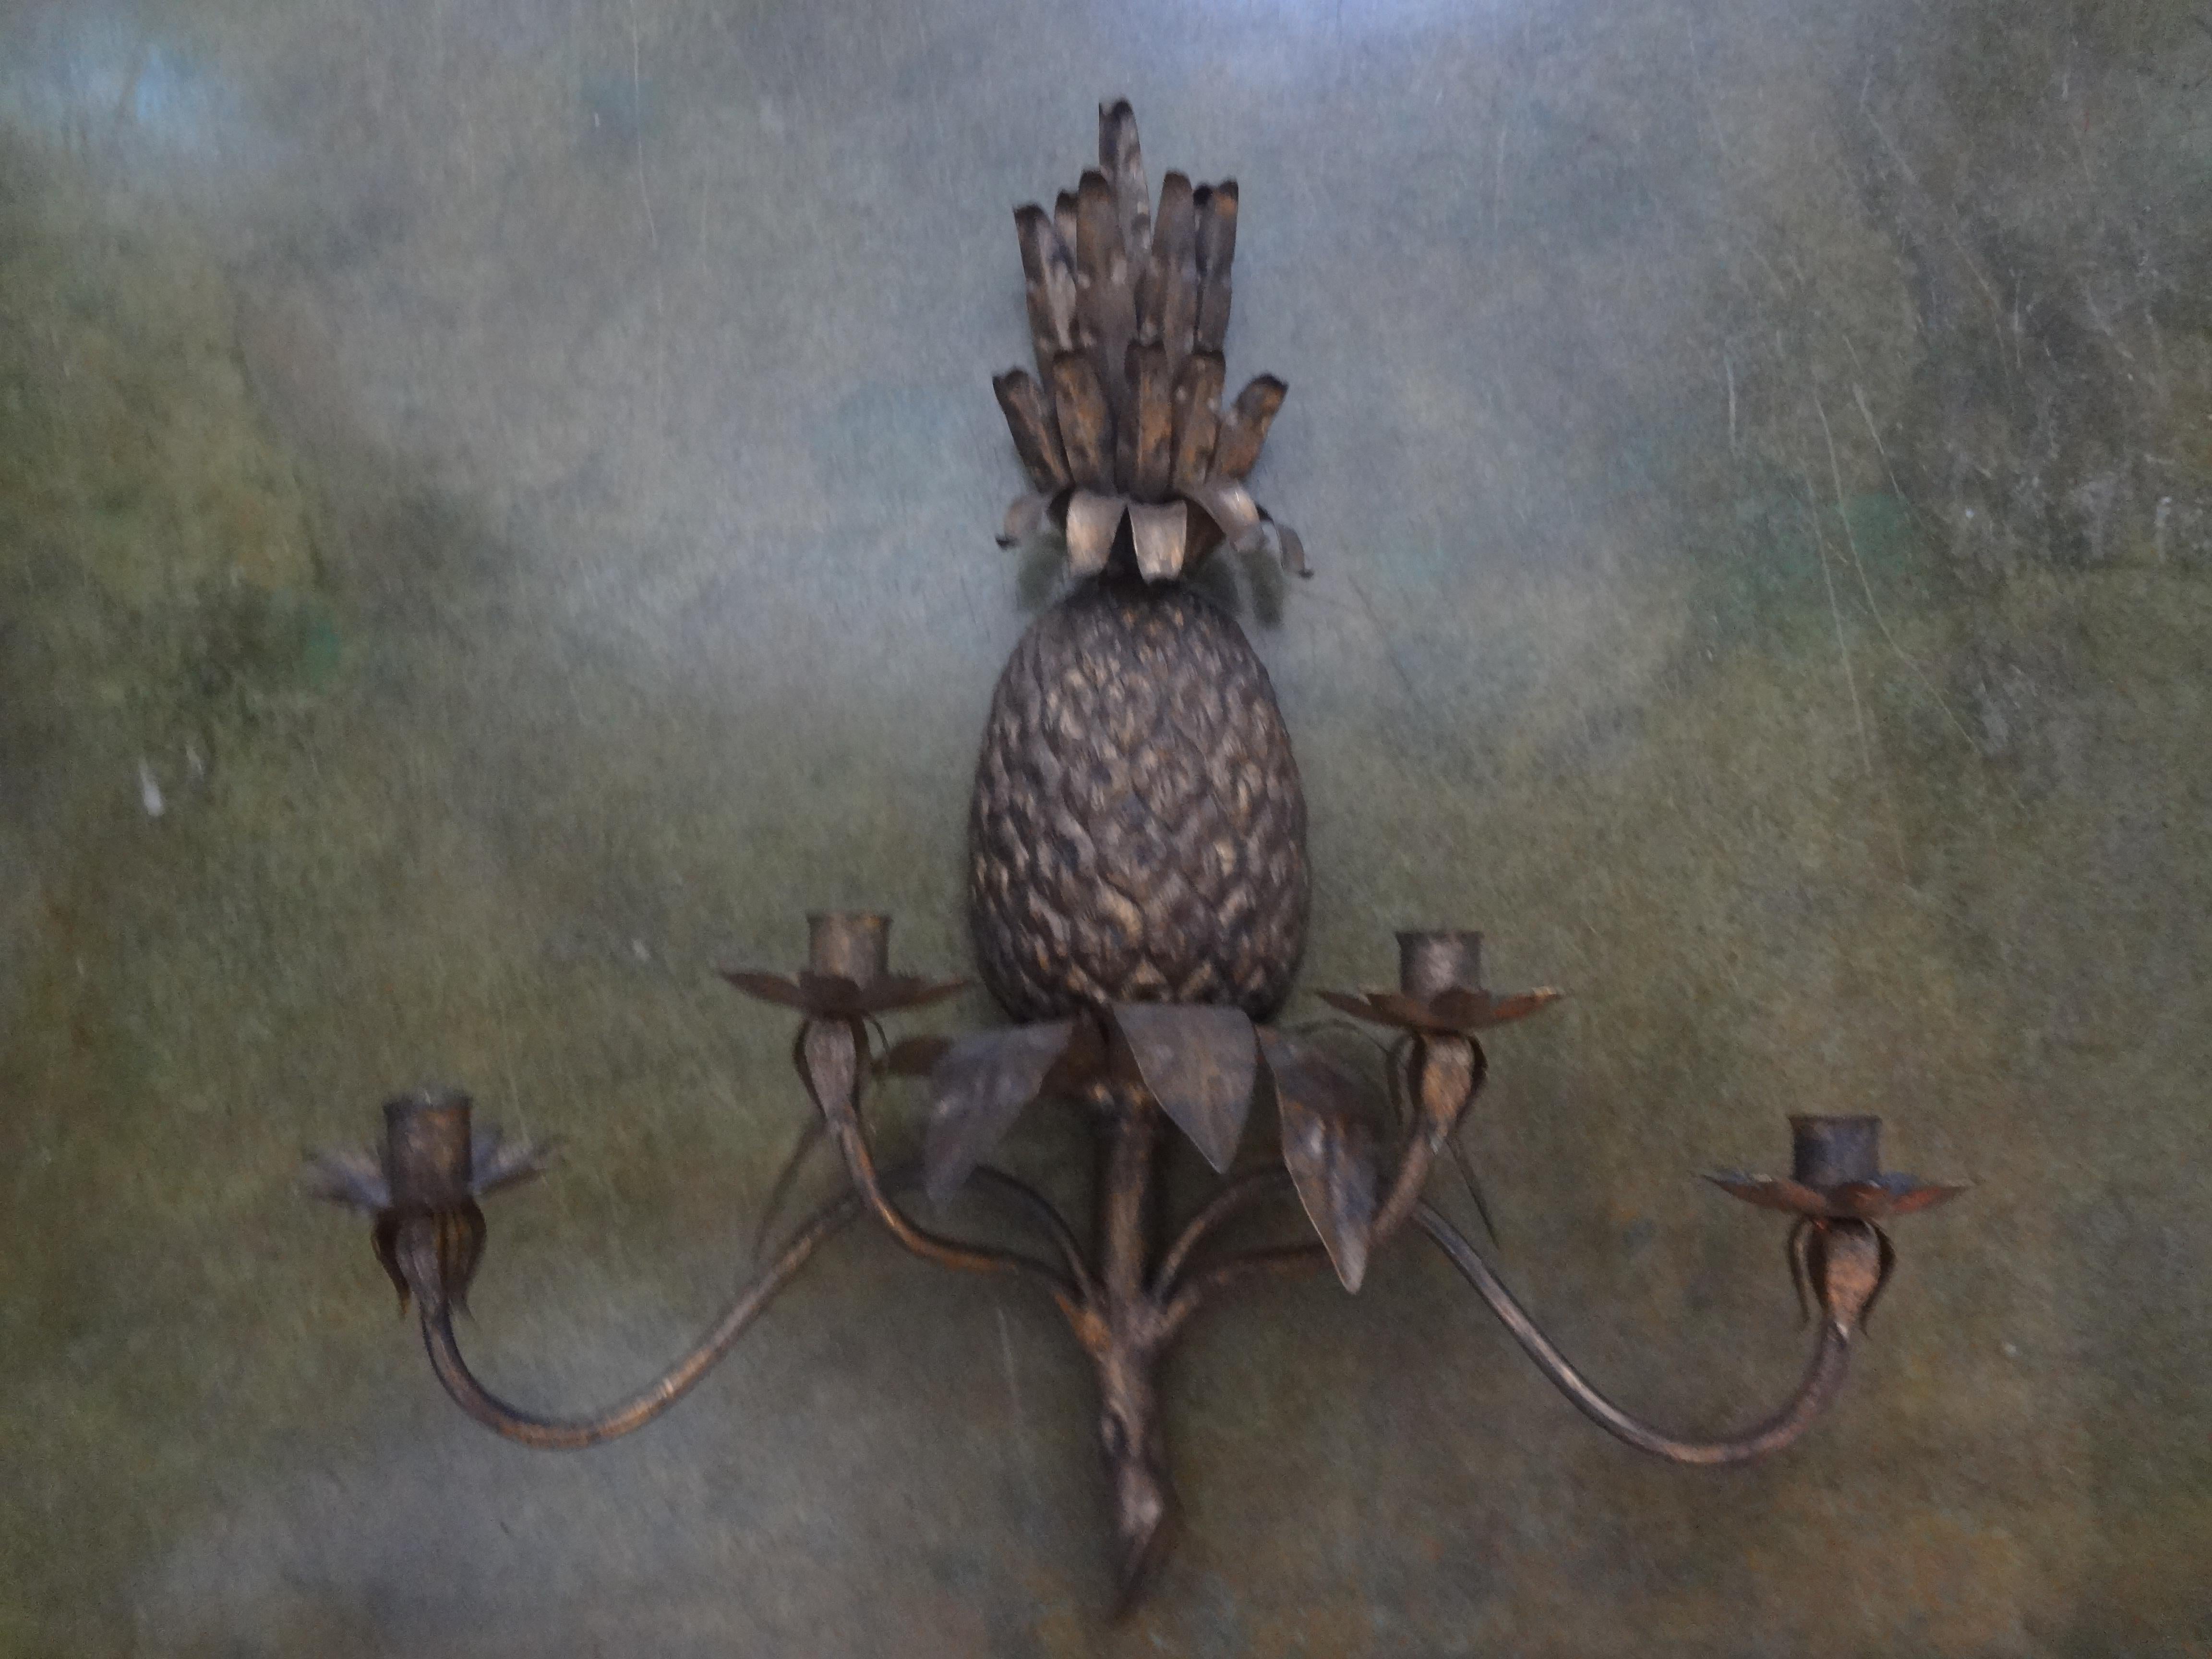 Large pair of Italian Hollywood Regency gilt metal pineapple sconces. This great pair of realistic Italian midcentury four-light sconces are made of heavy gauge gilt iron and tole. Currently candle sconces but could easily be electrified if desired.